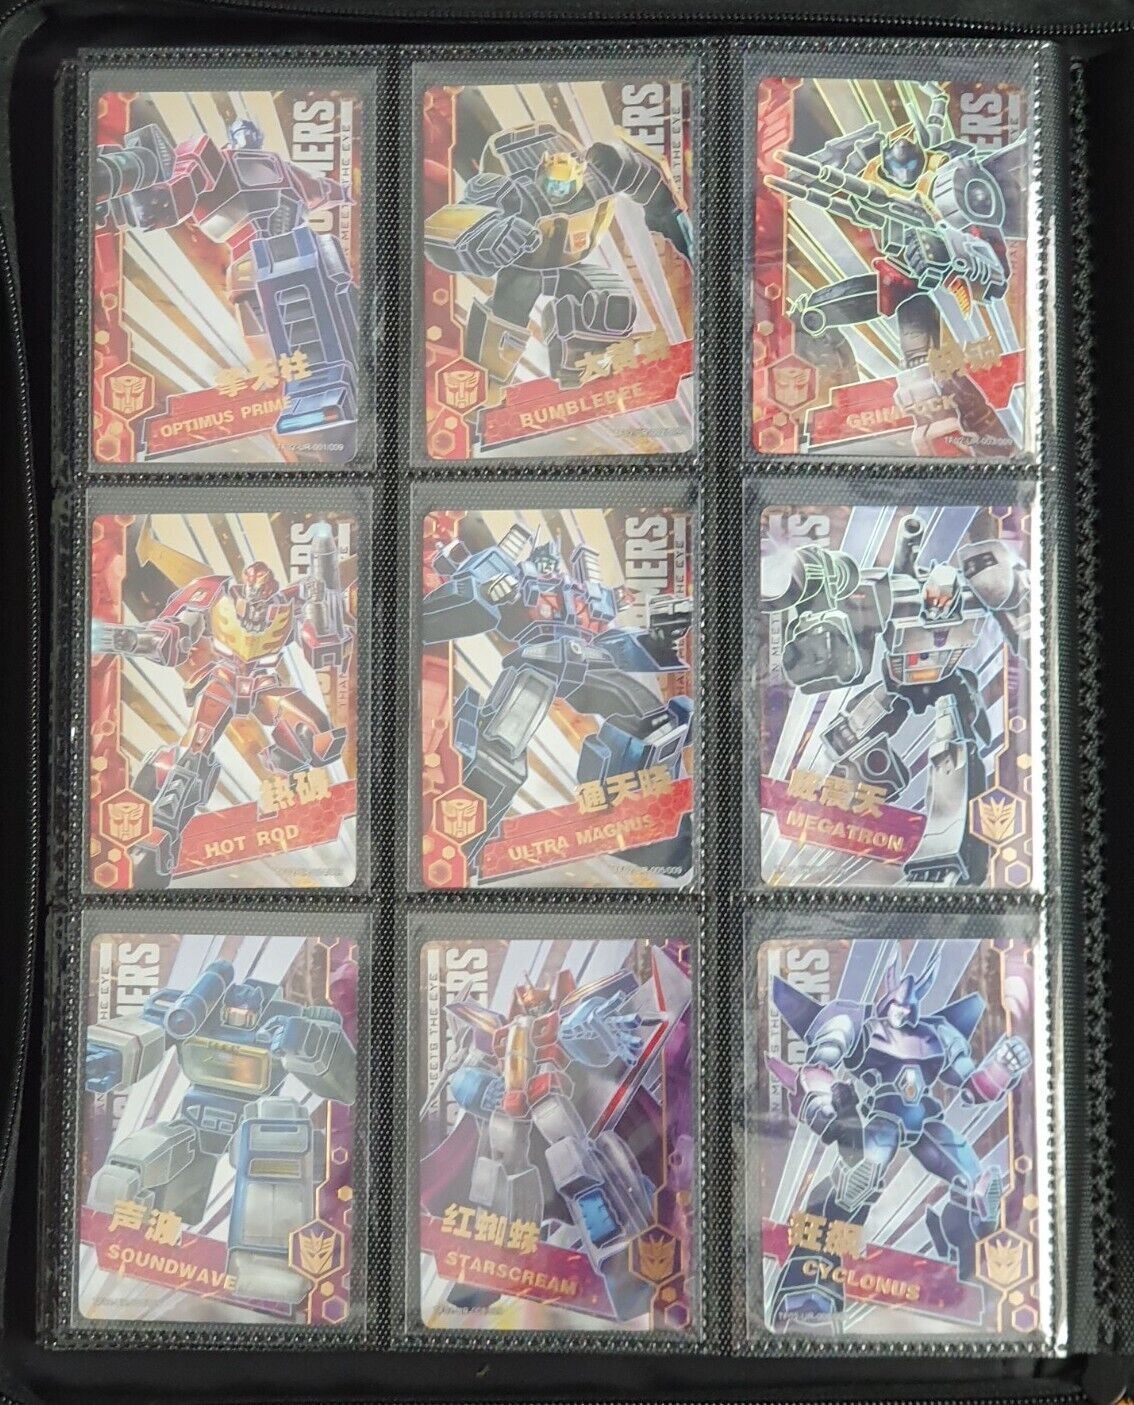 9x Rare Kayou Transformers G1 Cybertron Collection Series 2 Complete UR Holo Lot